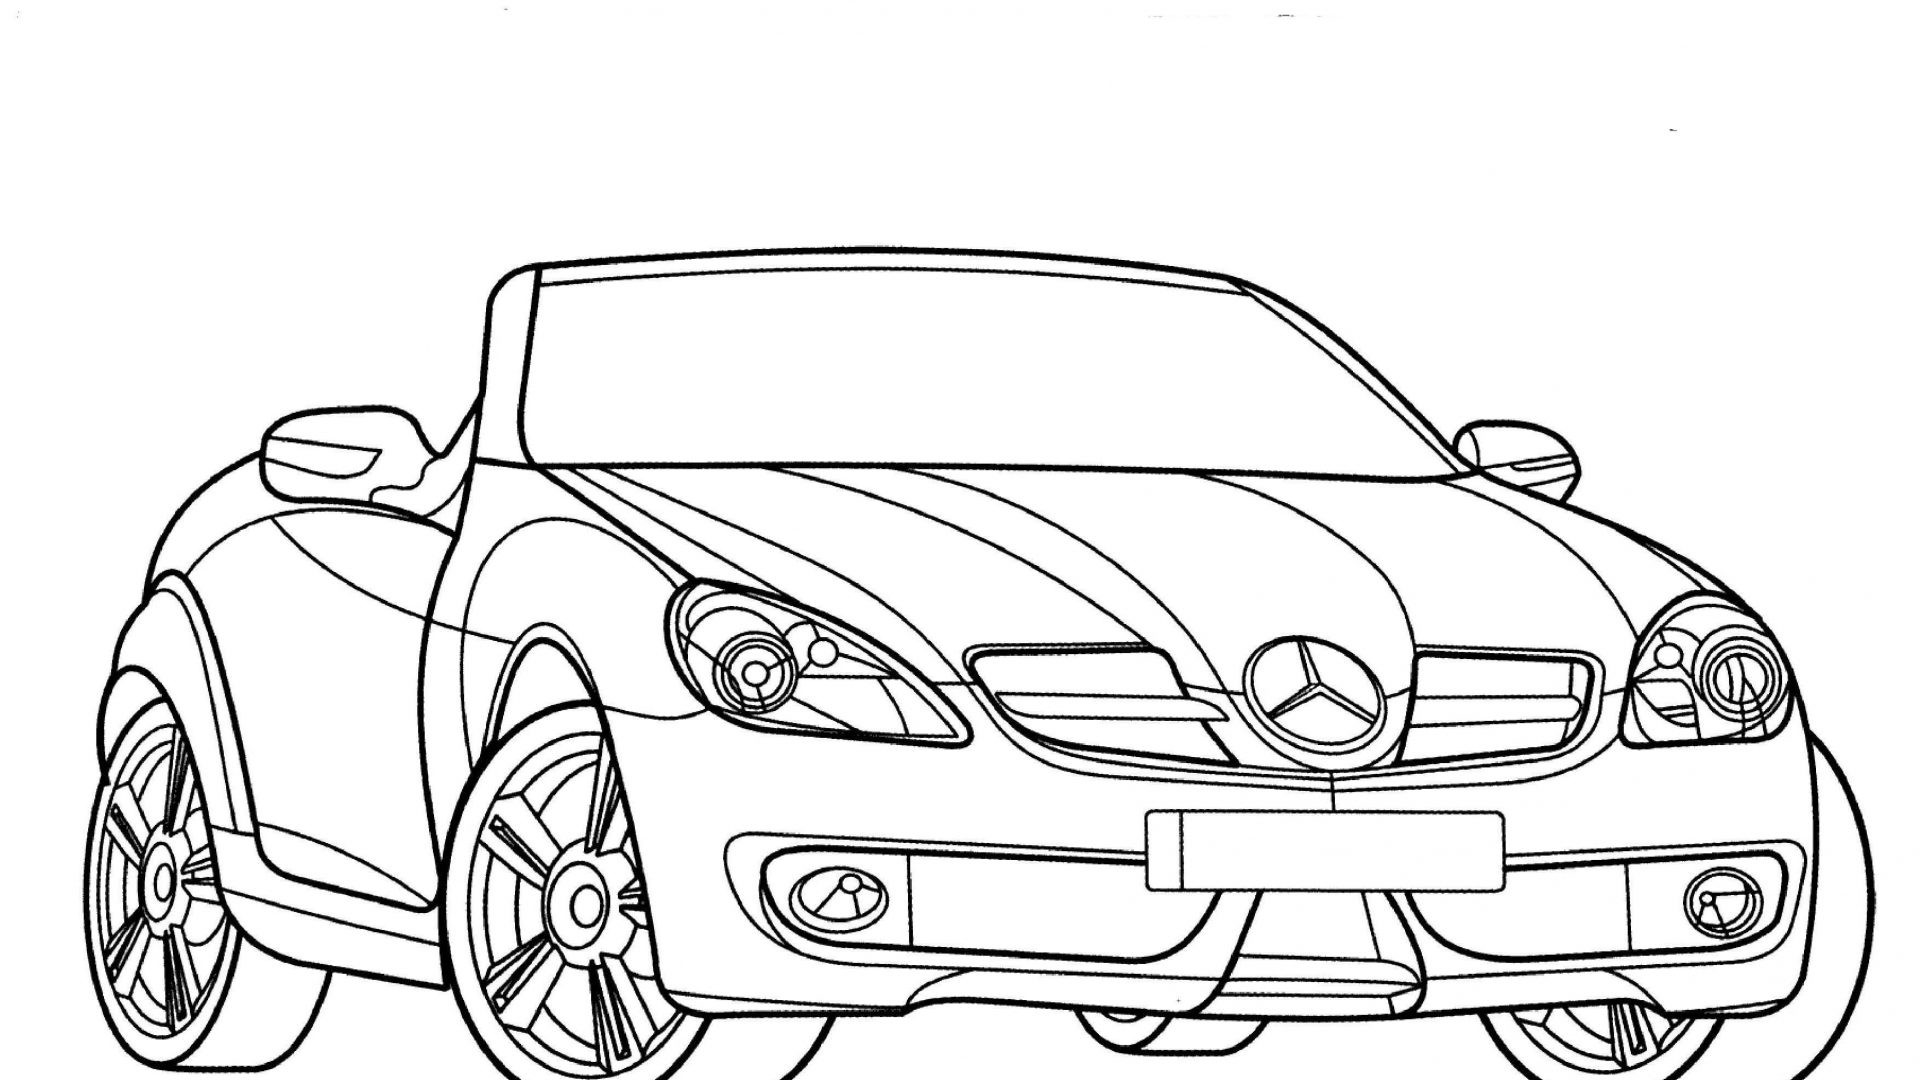 Mercedes Coloring Pages at GetColorings.com | Free printable colorings ...